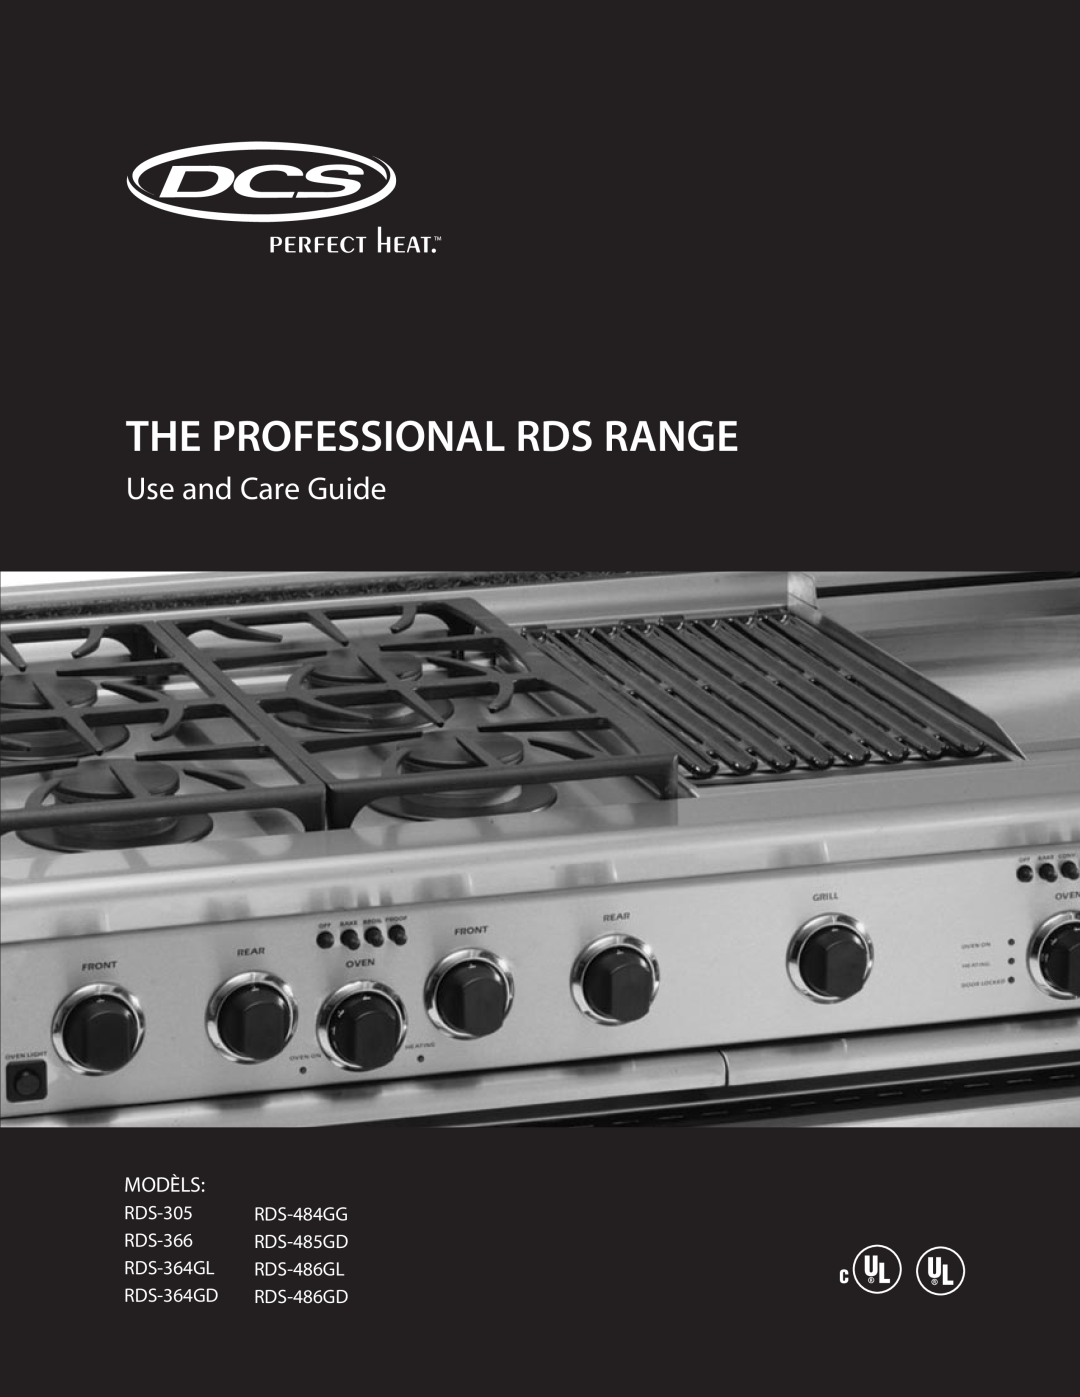 DCS RDS-484GG, RDS-485GD, RDS-366 manual The Professional Rds Range, Use and Care Guide, Modèls, RDS-364GD RDS-486GD 